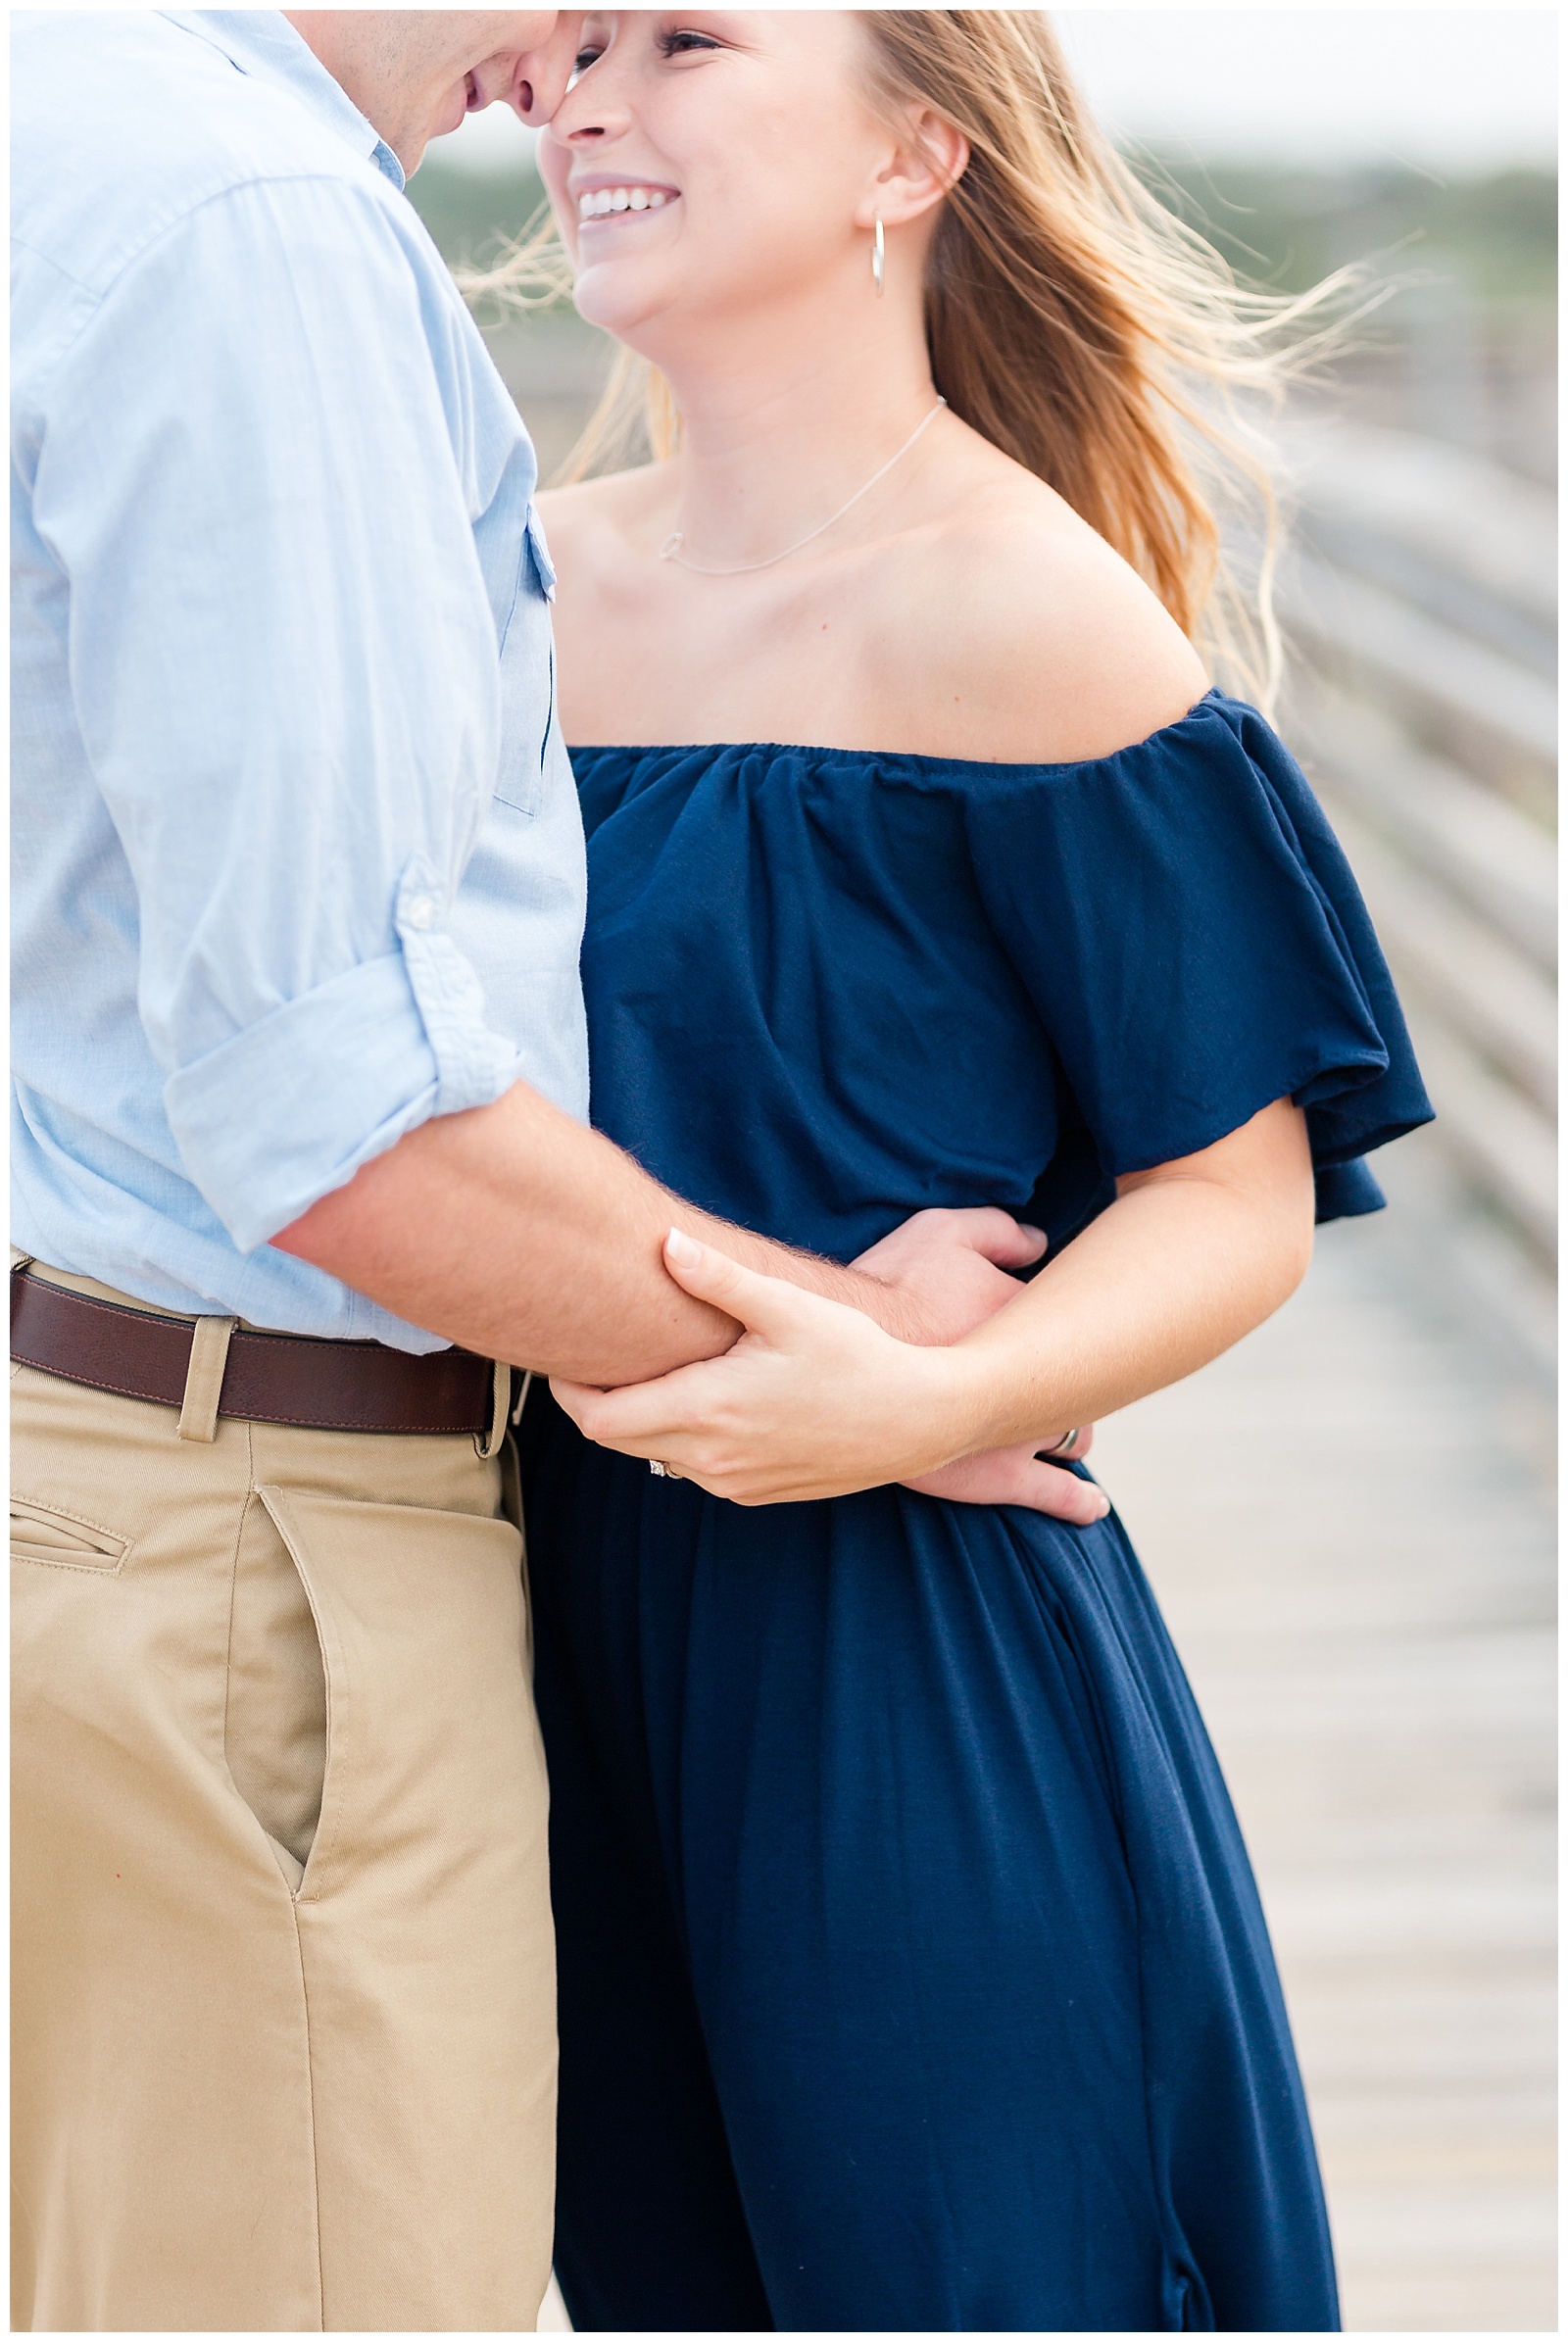 A Fall Engagement Session at First Landing State Park